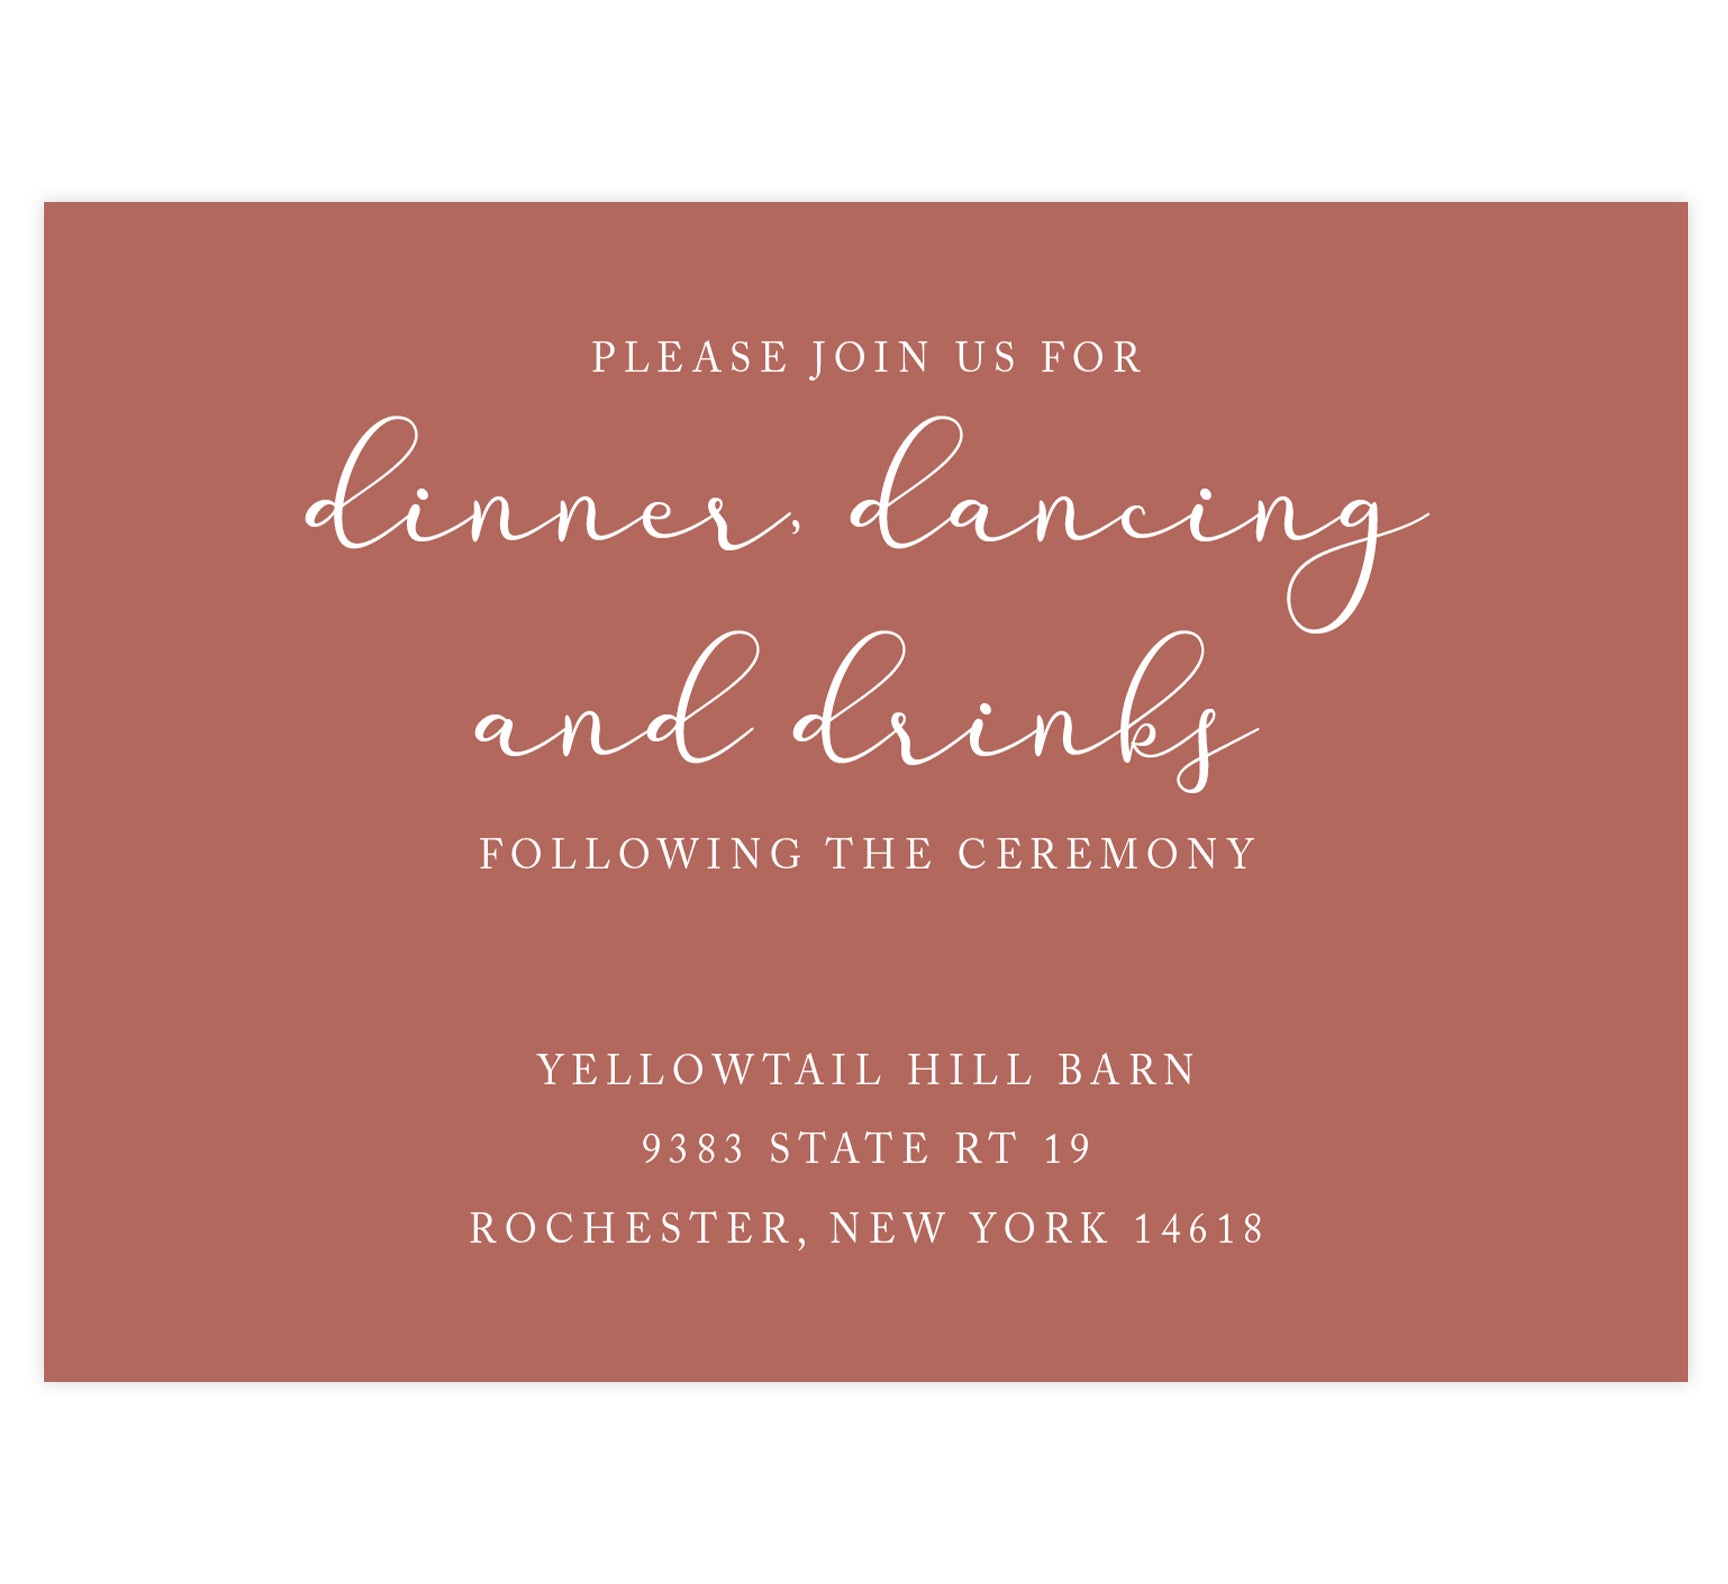 Romantic Pinks wedding reception card; light rust colored background with white text